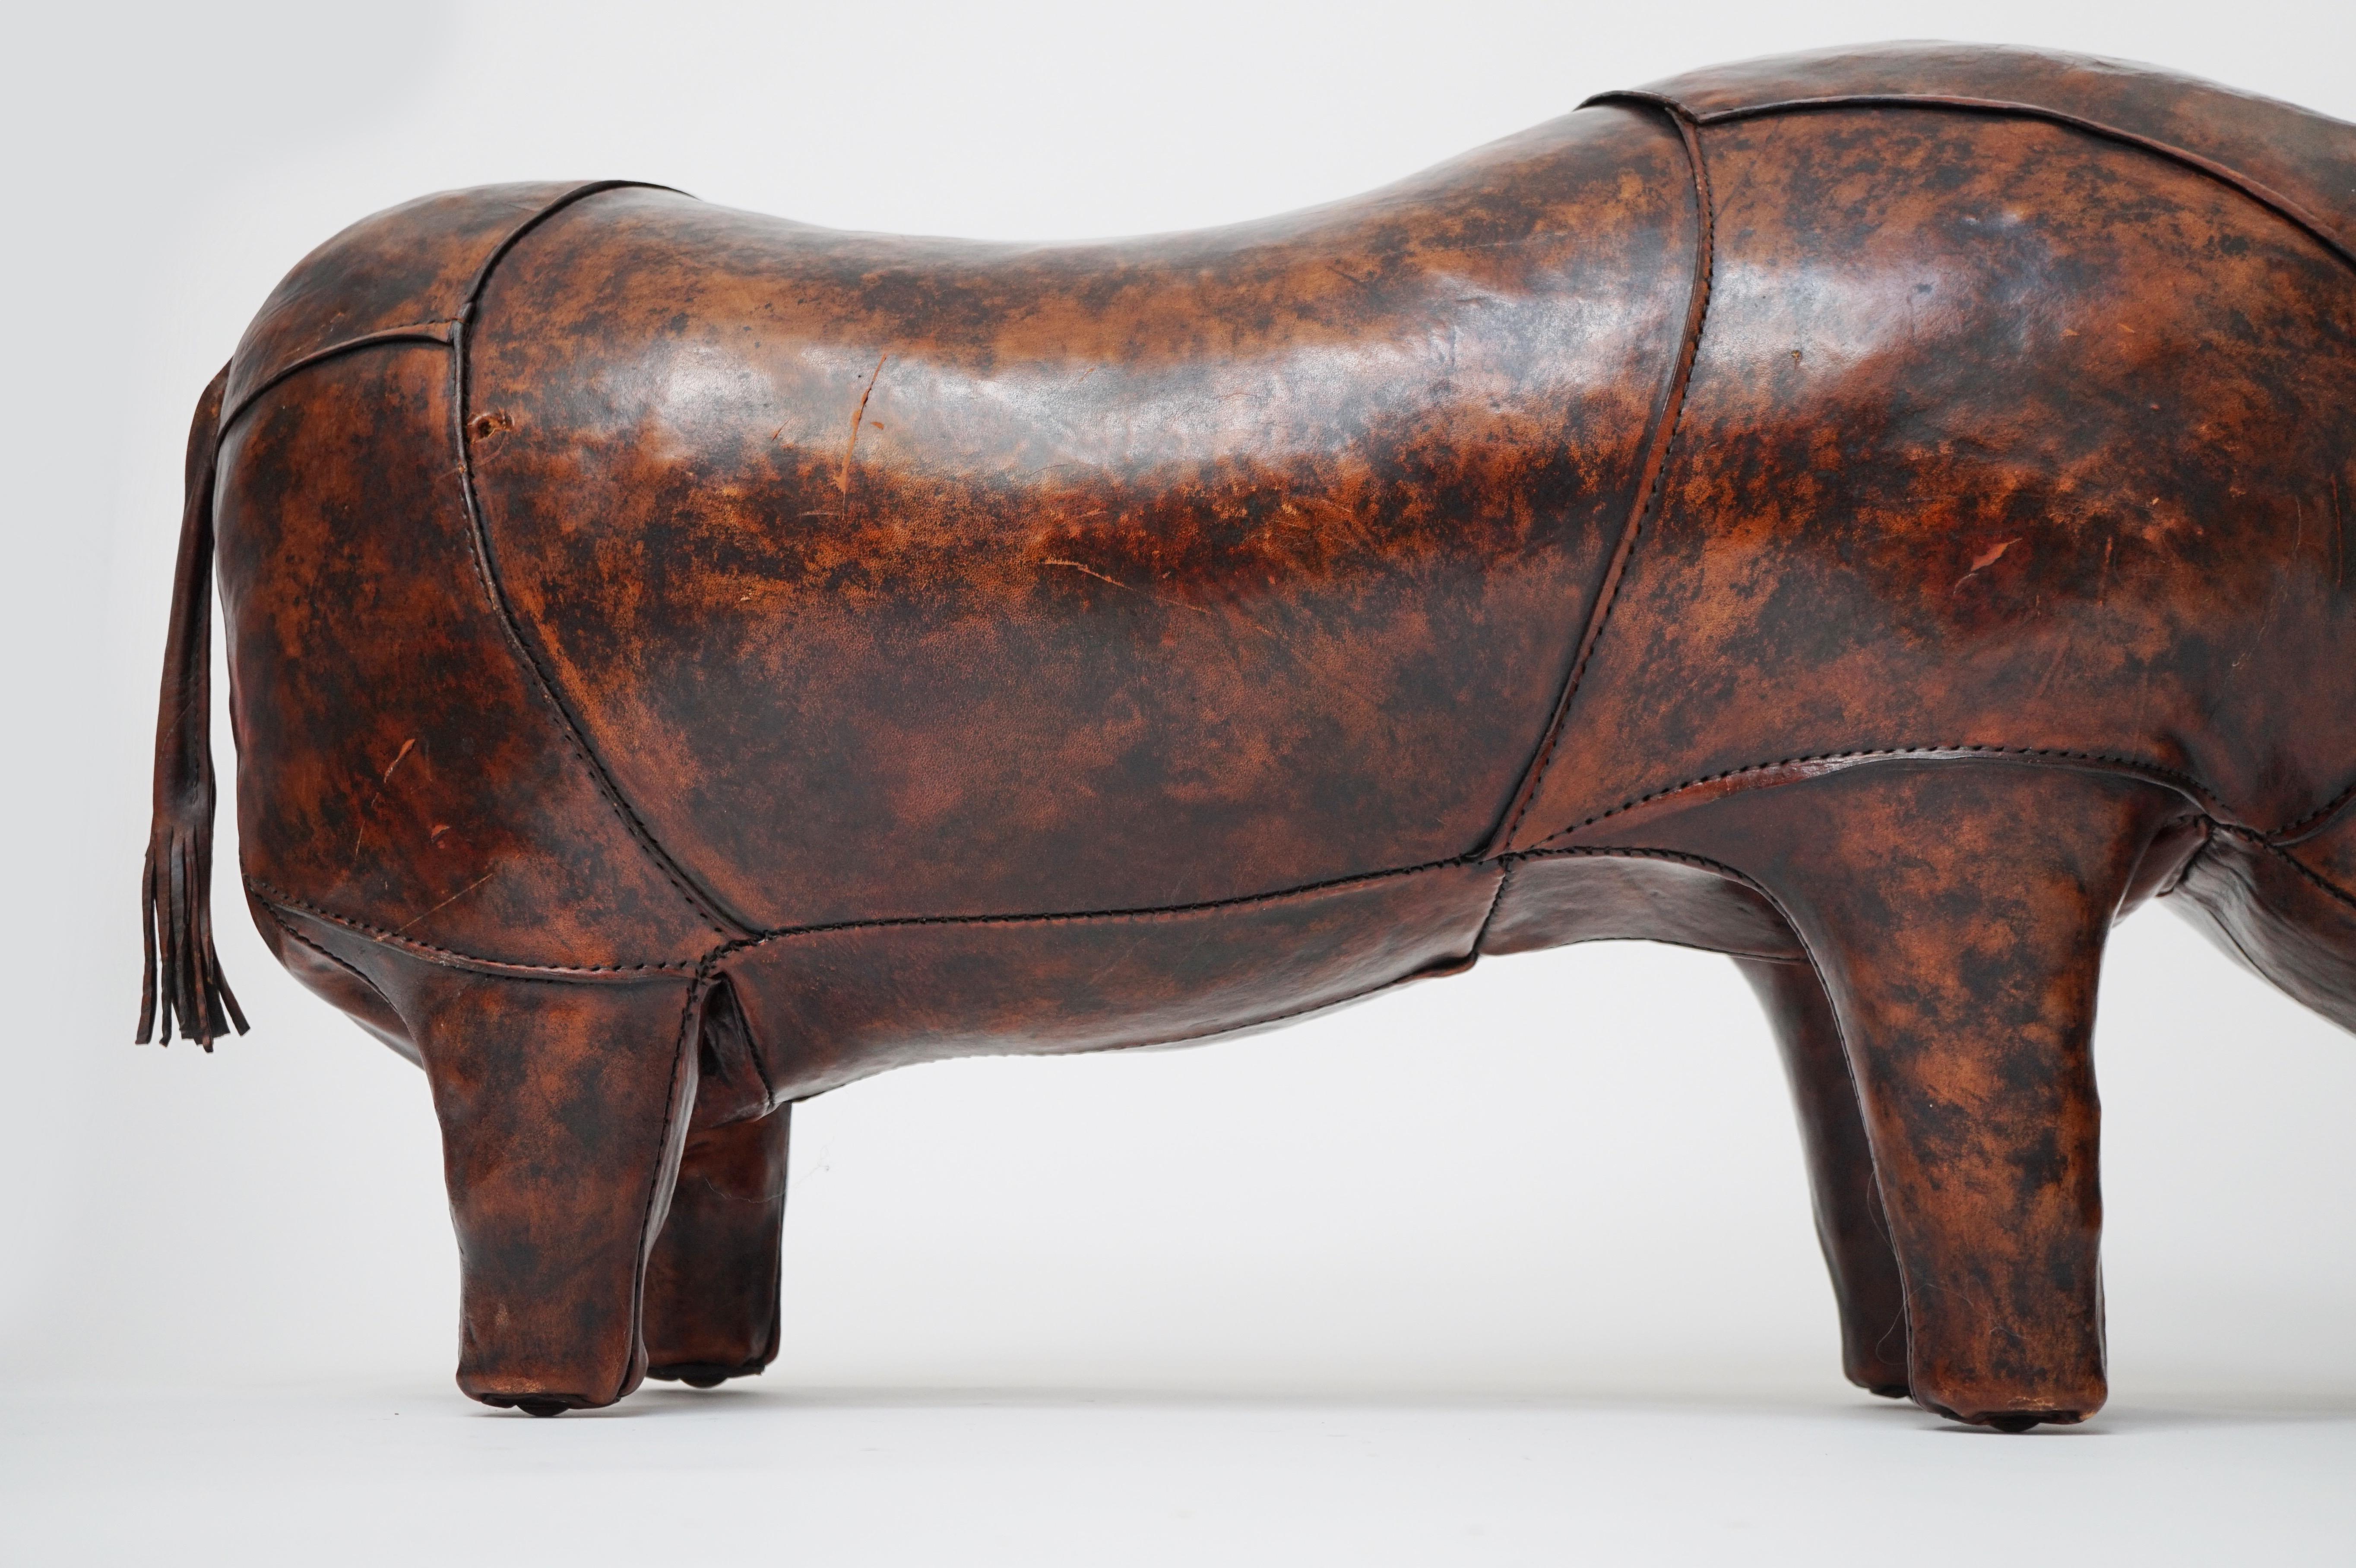 Leather Rhino Stool by Dimitri Omersa for Abercrombie & Fitch, Signed 3